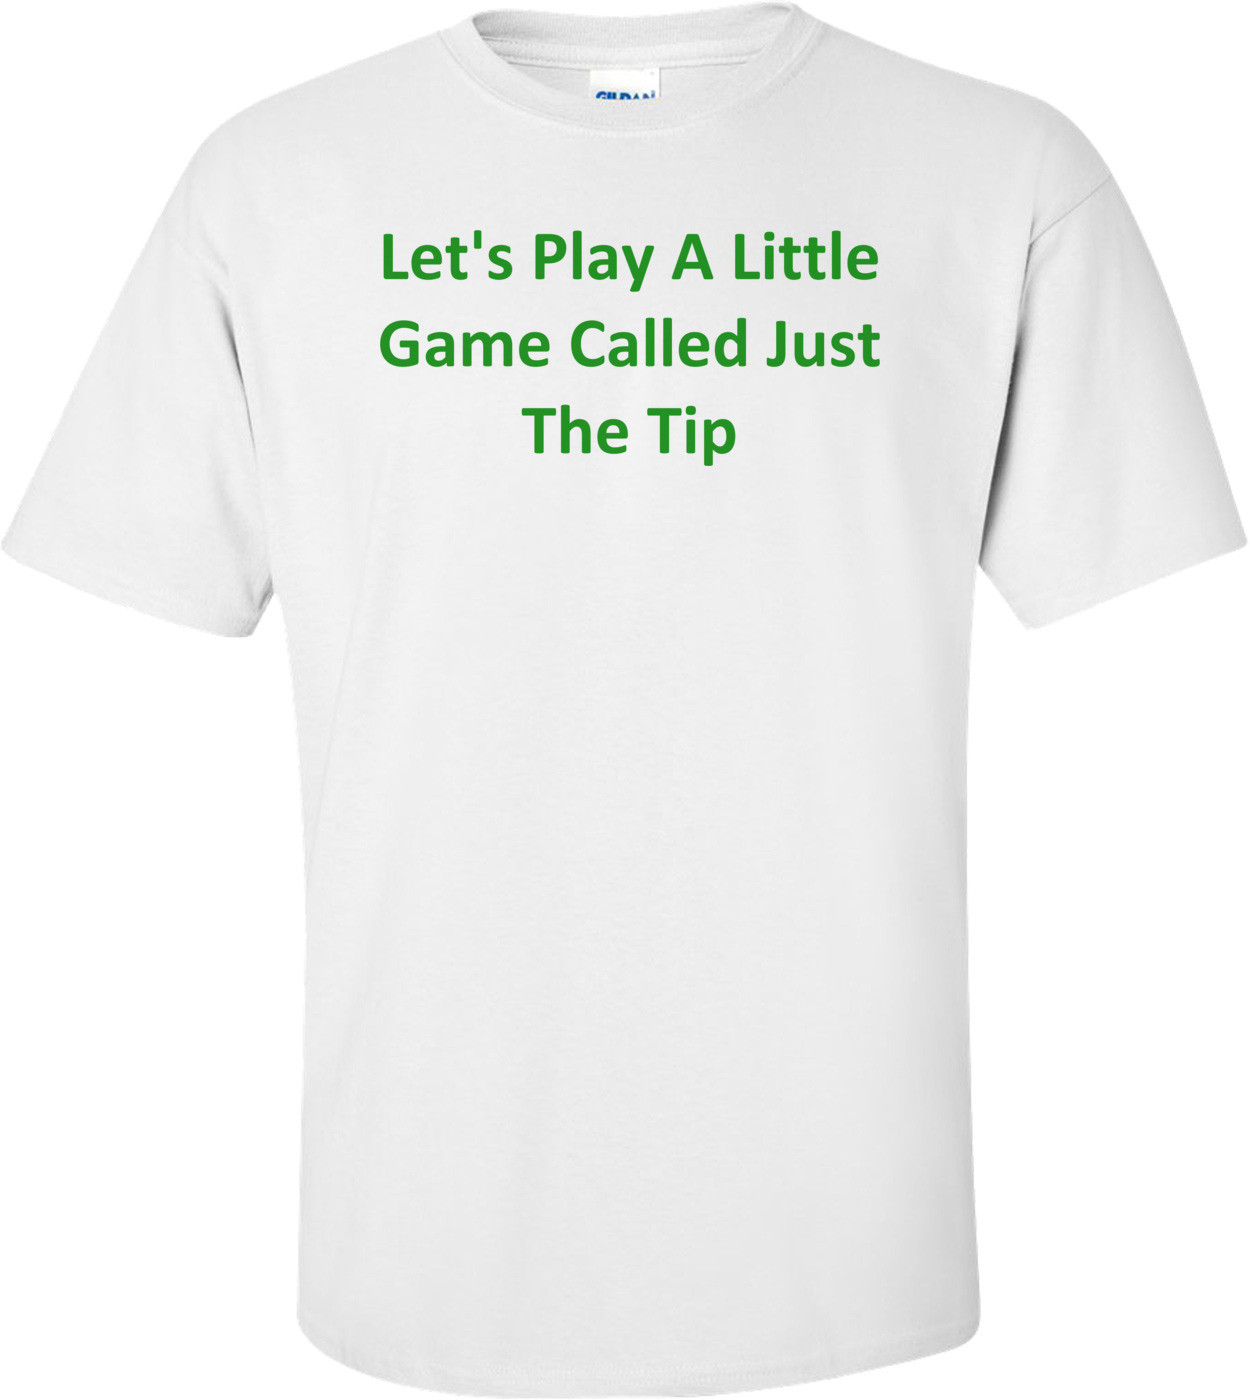 Let's Play A Little Game Called Just The Tip shirt